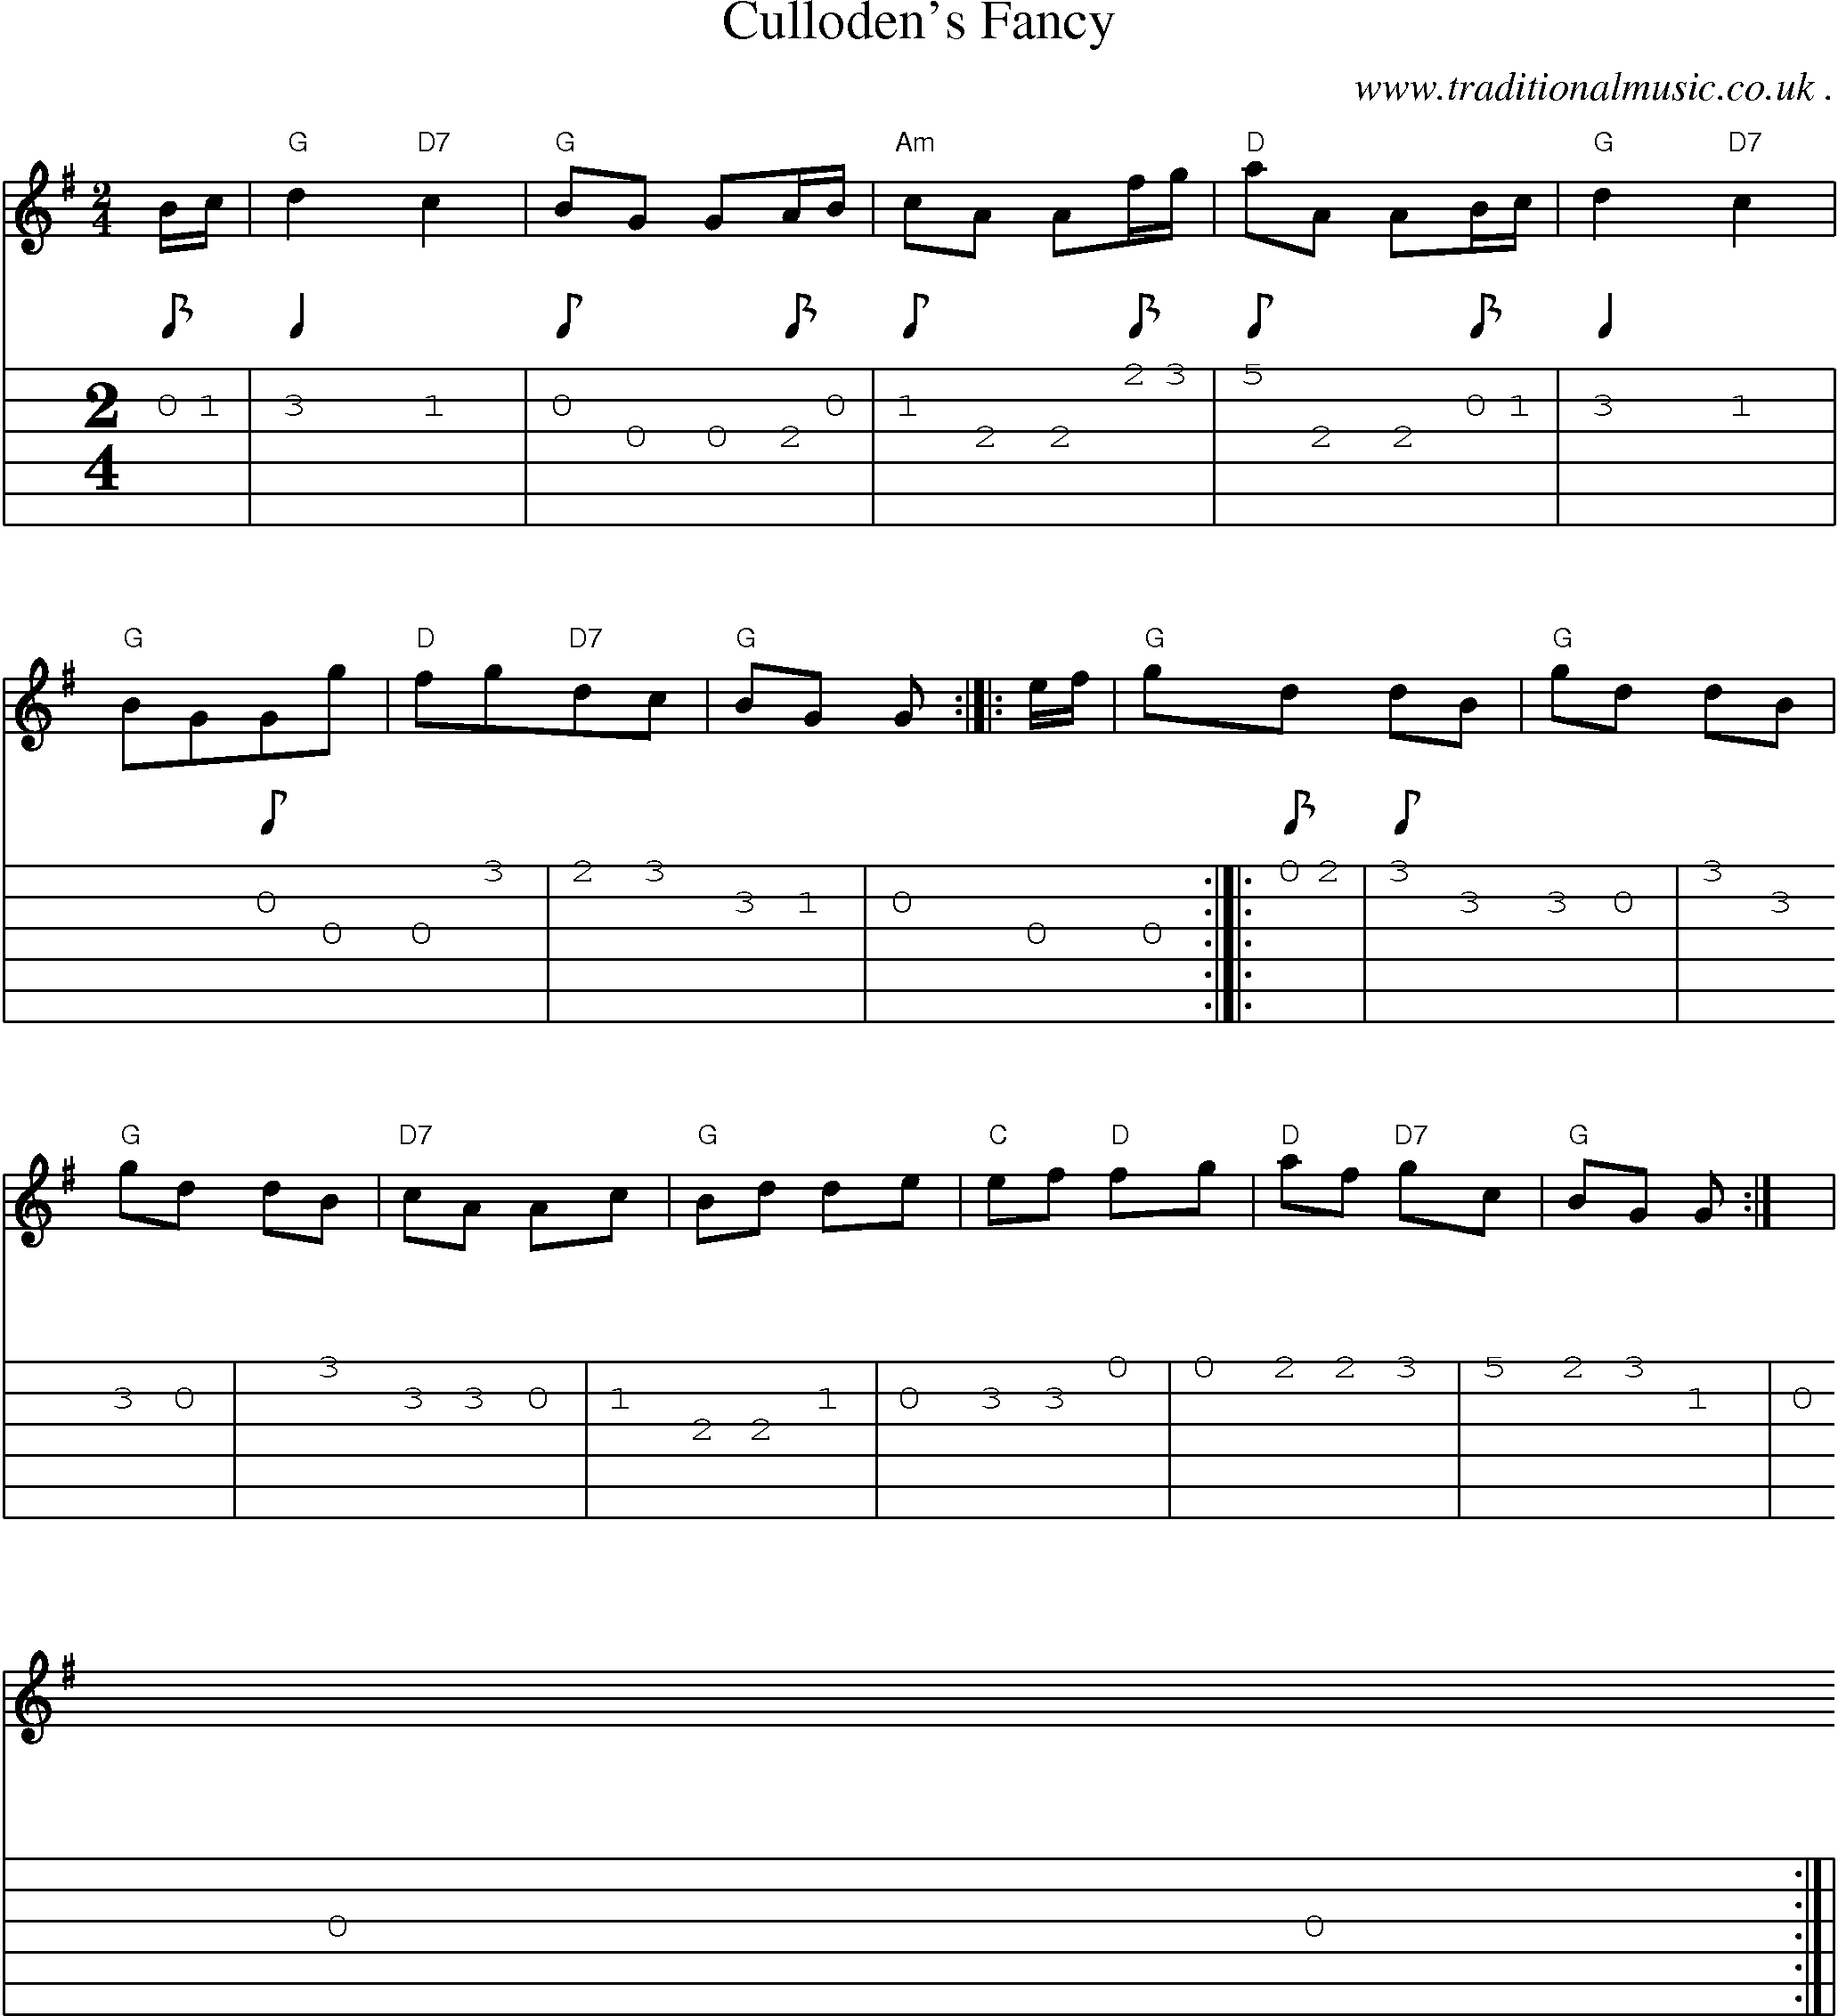 Sheet-music  score, Chords and Guitar Tabs for Cullodens Fancy